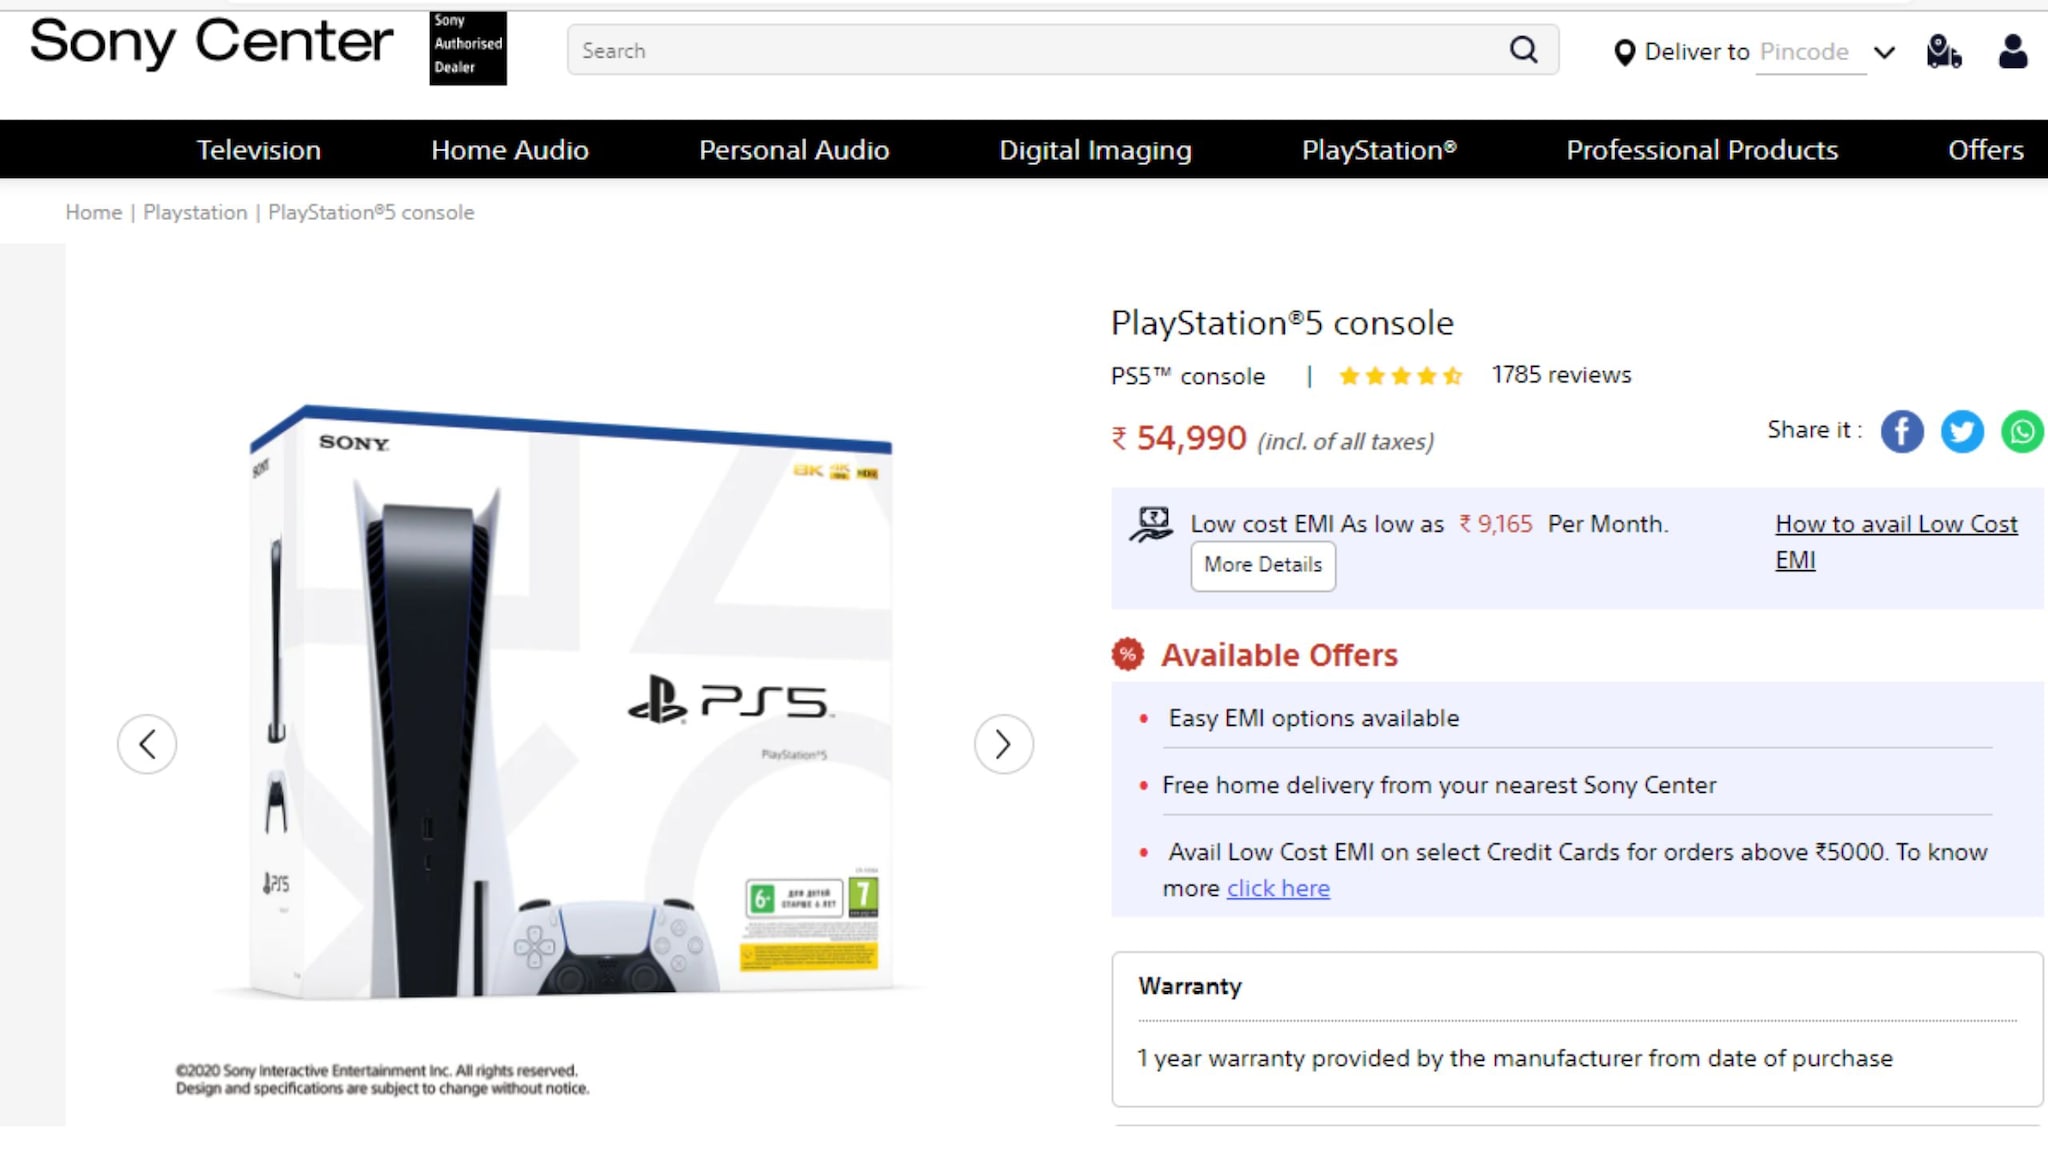 PlayStation 5 price in India hiked by Rs 5000: here is how much it